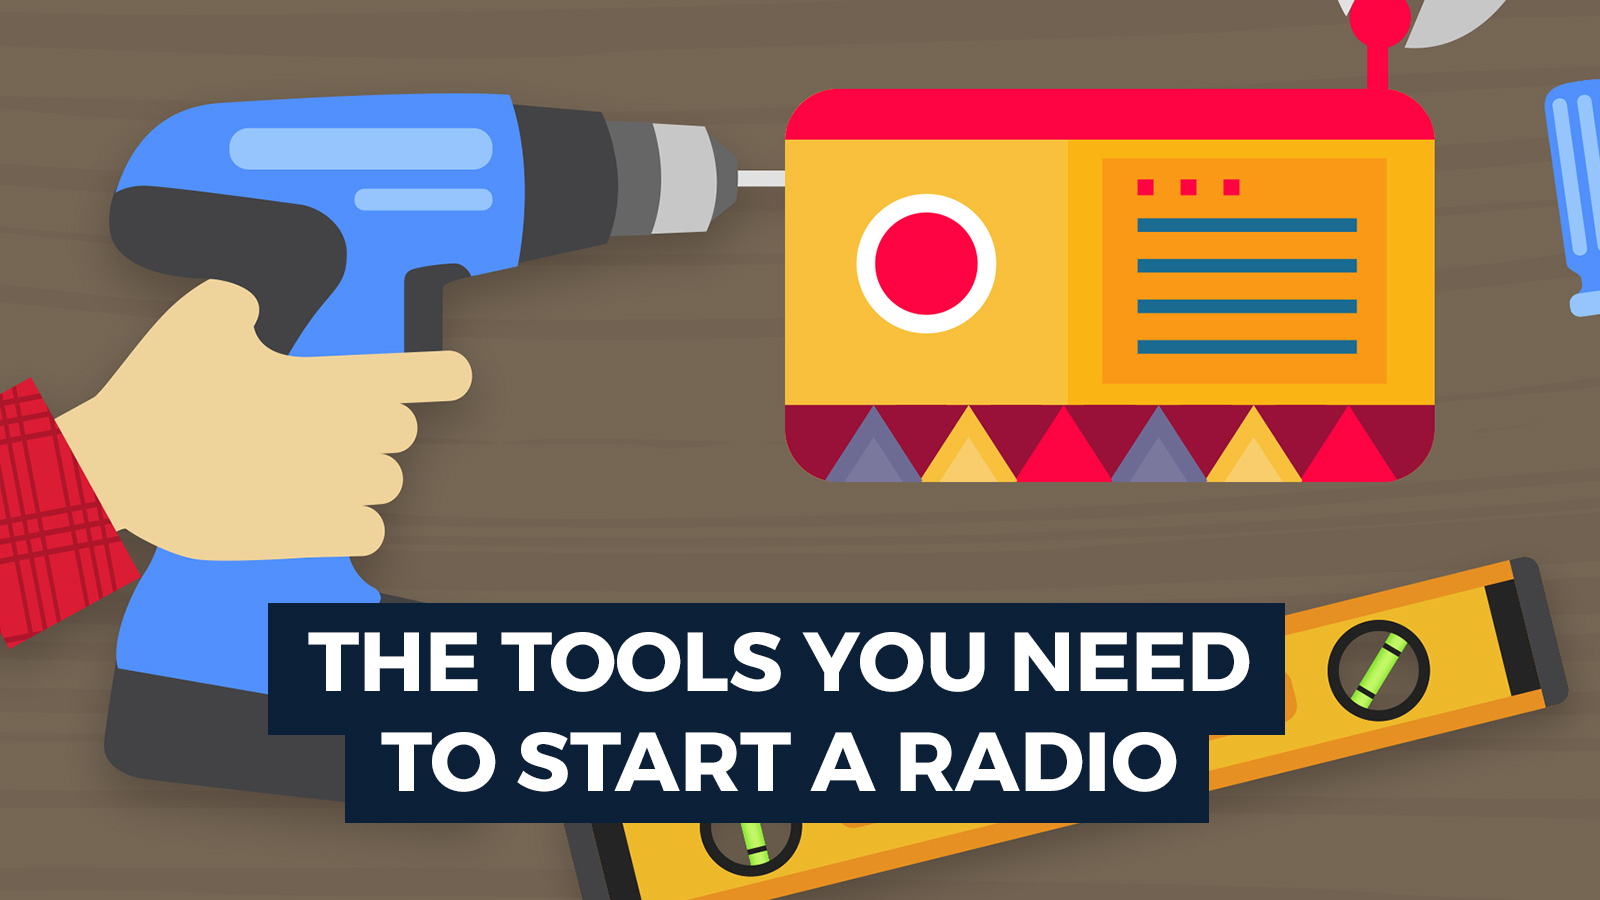 How do I start my own radio station? The tools you need to start a Radio